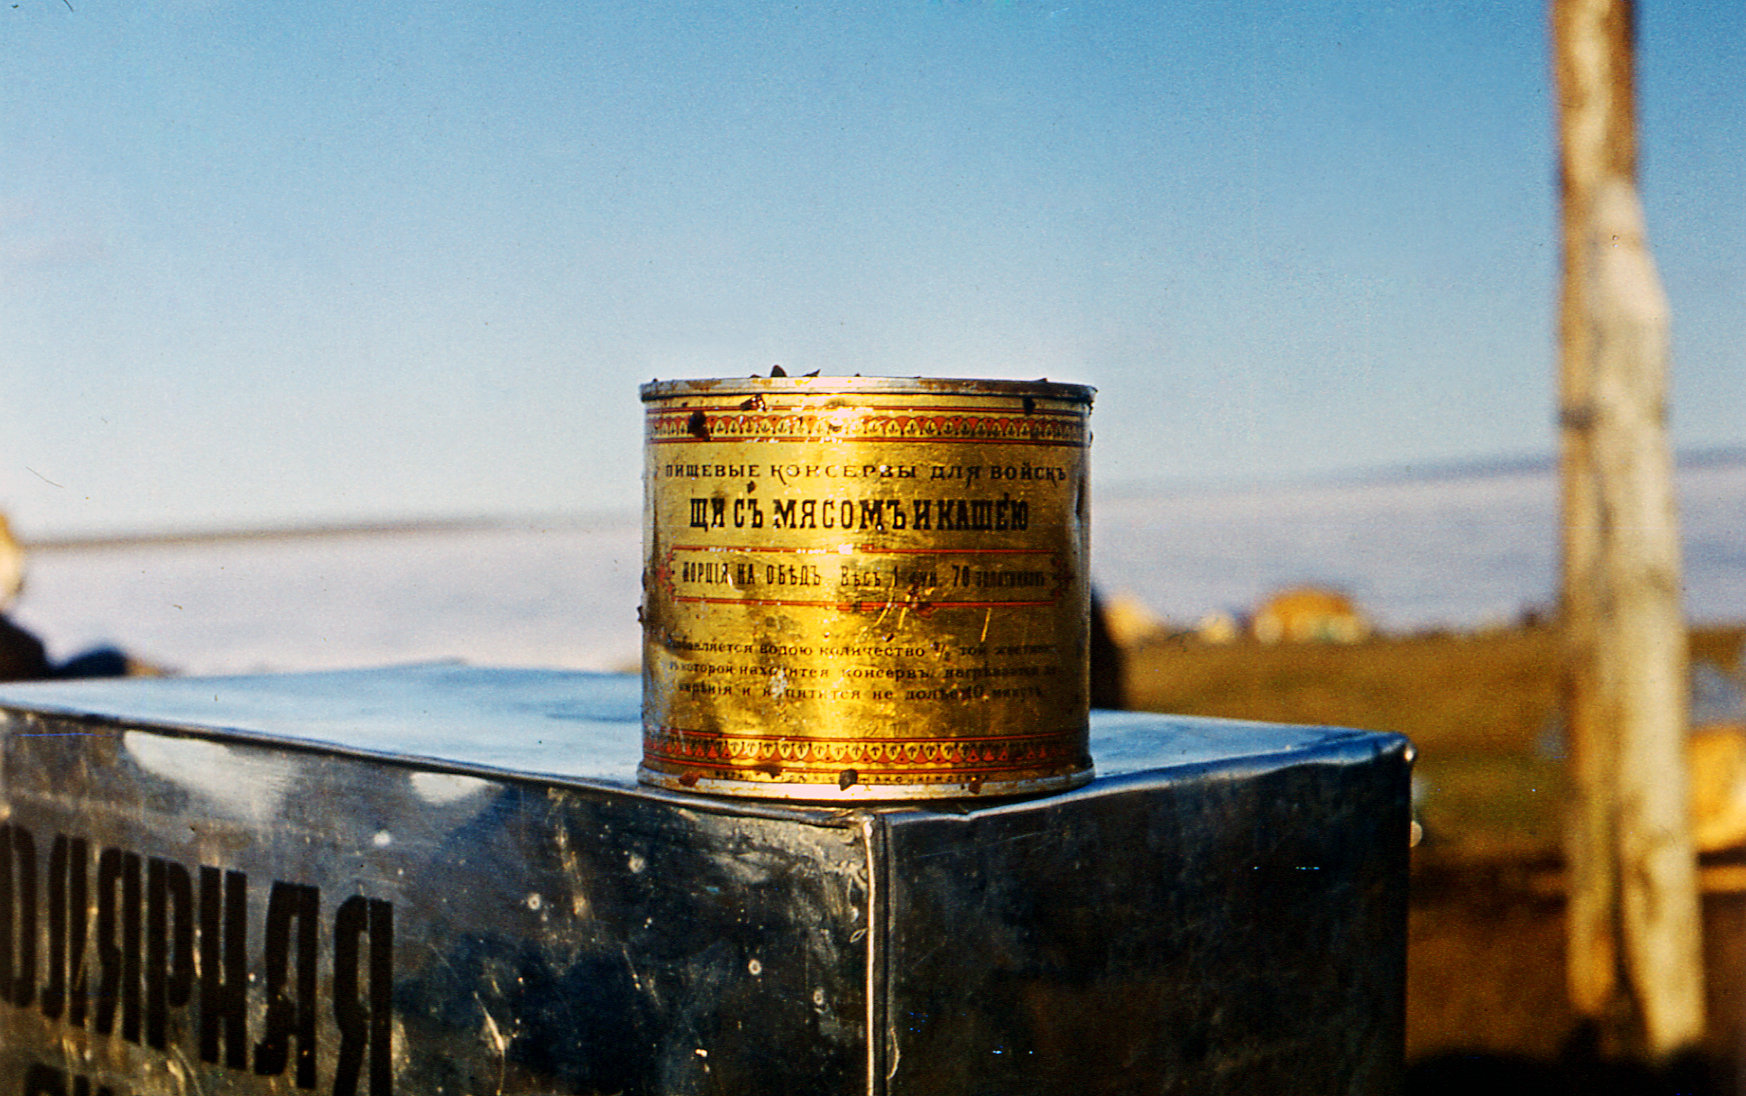 Left image: Tinned food, cabbage soup with meat and cereal, for military troops found at the food storage site of Eduard Toll’s expedition; Right image: A box from the food storage site of Eduard Toll’s expedition